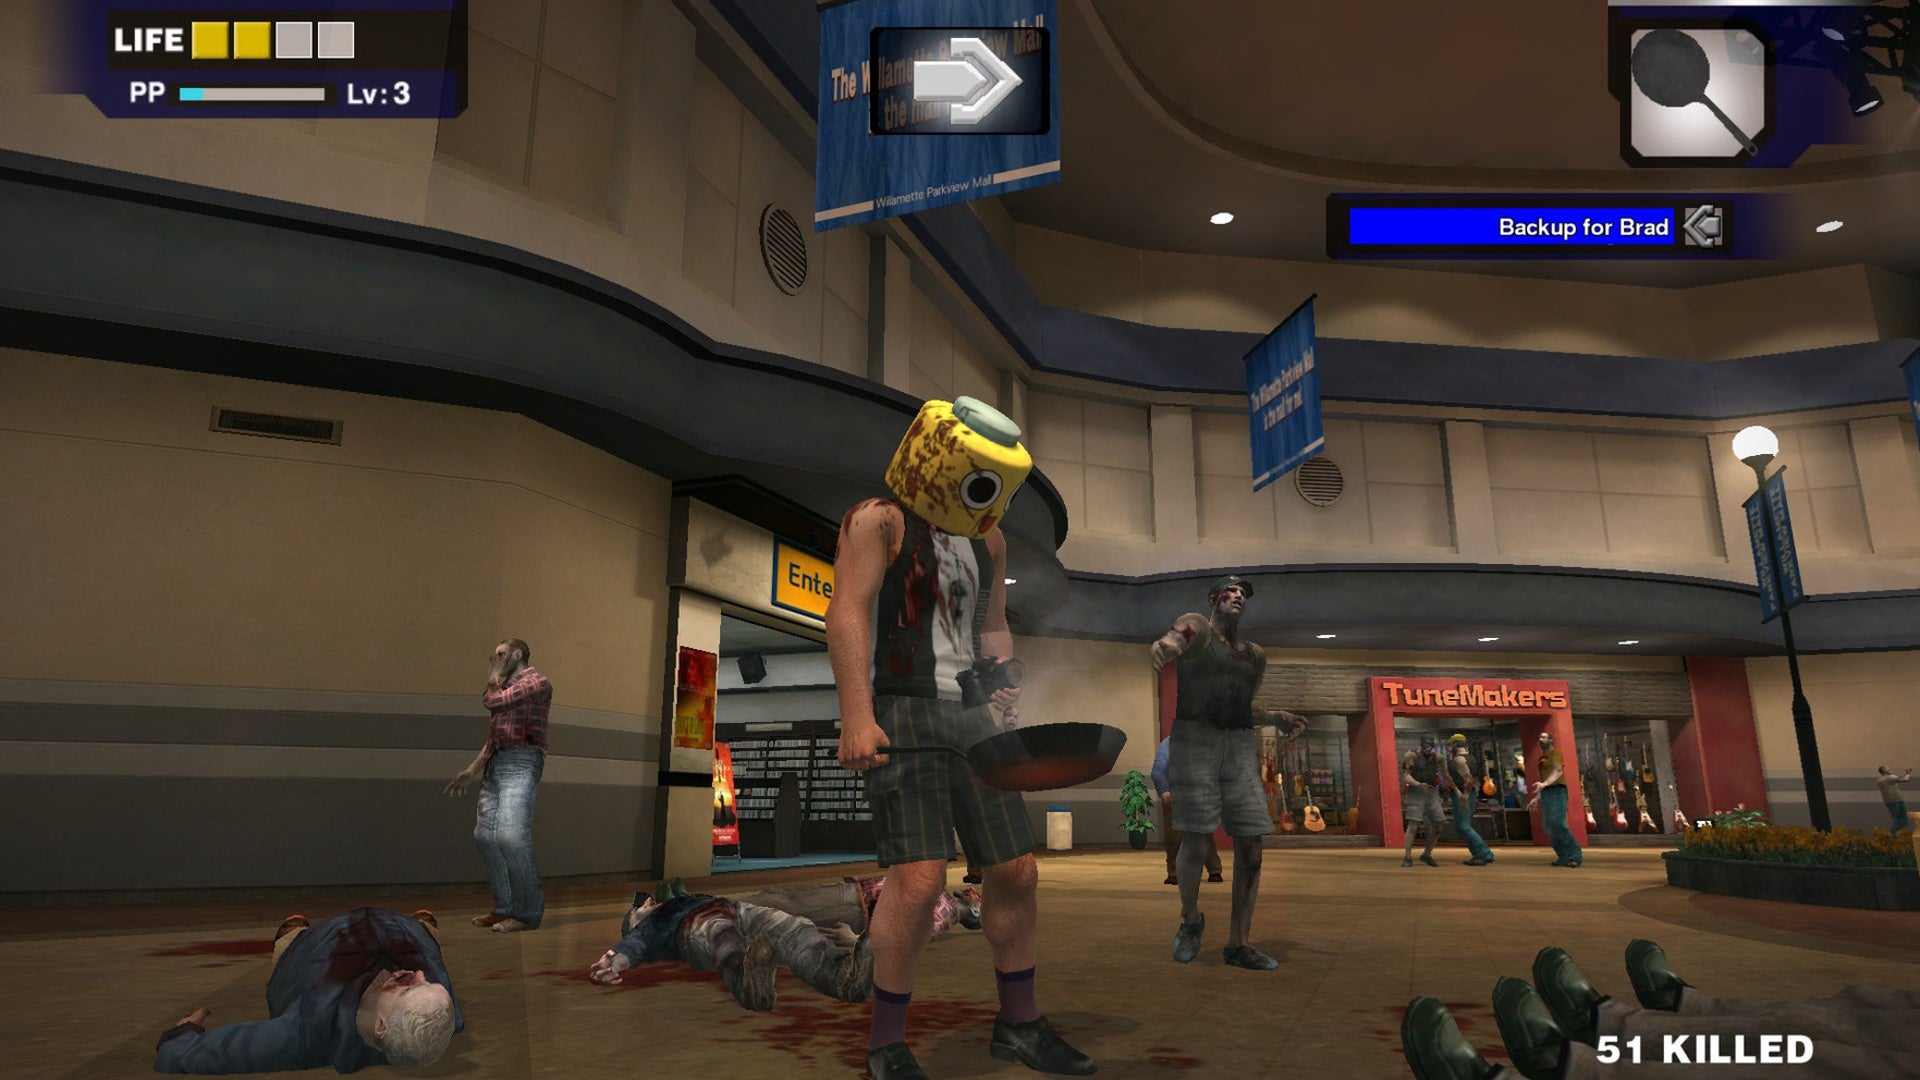 Frank from Dead Rising wearing a weird hat and holding a frying pan.